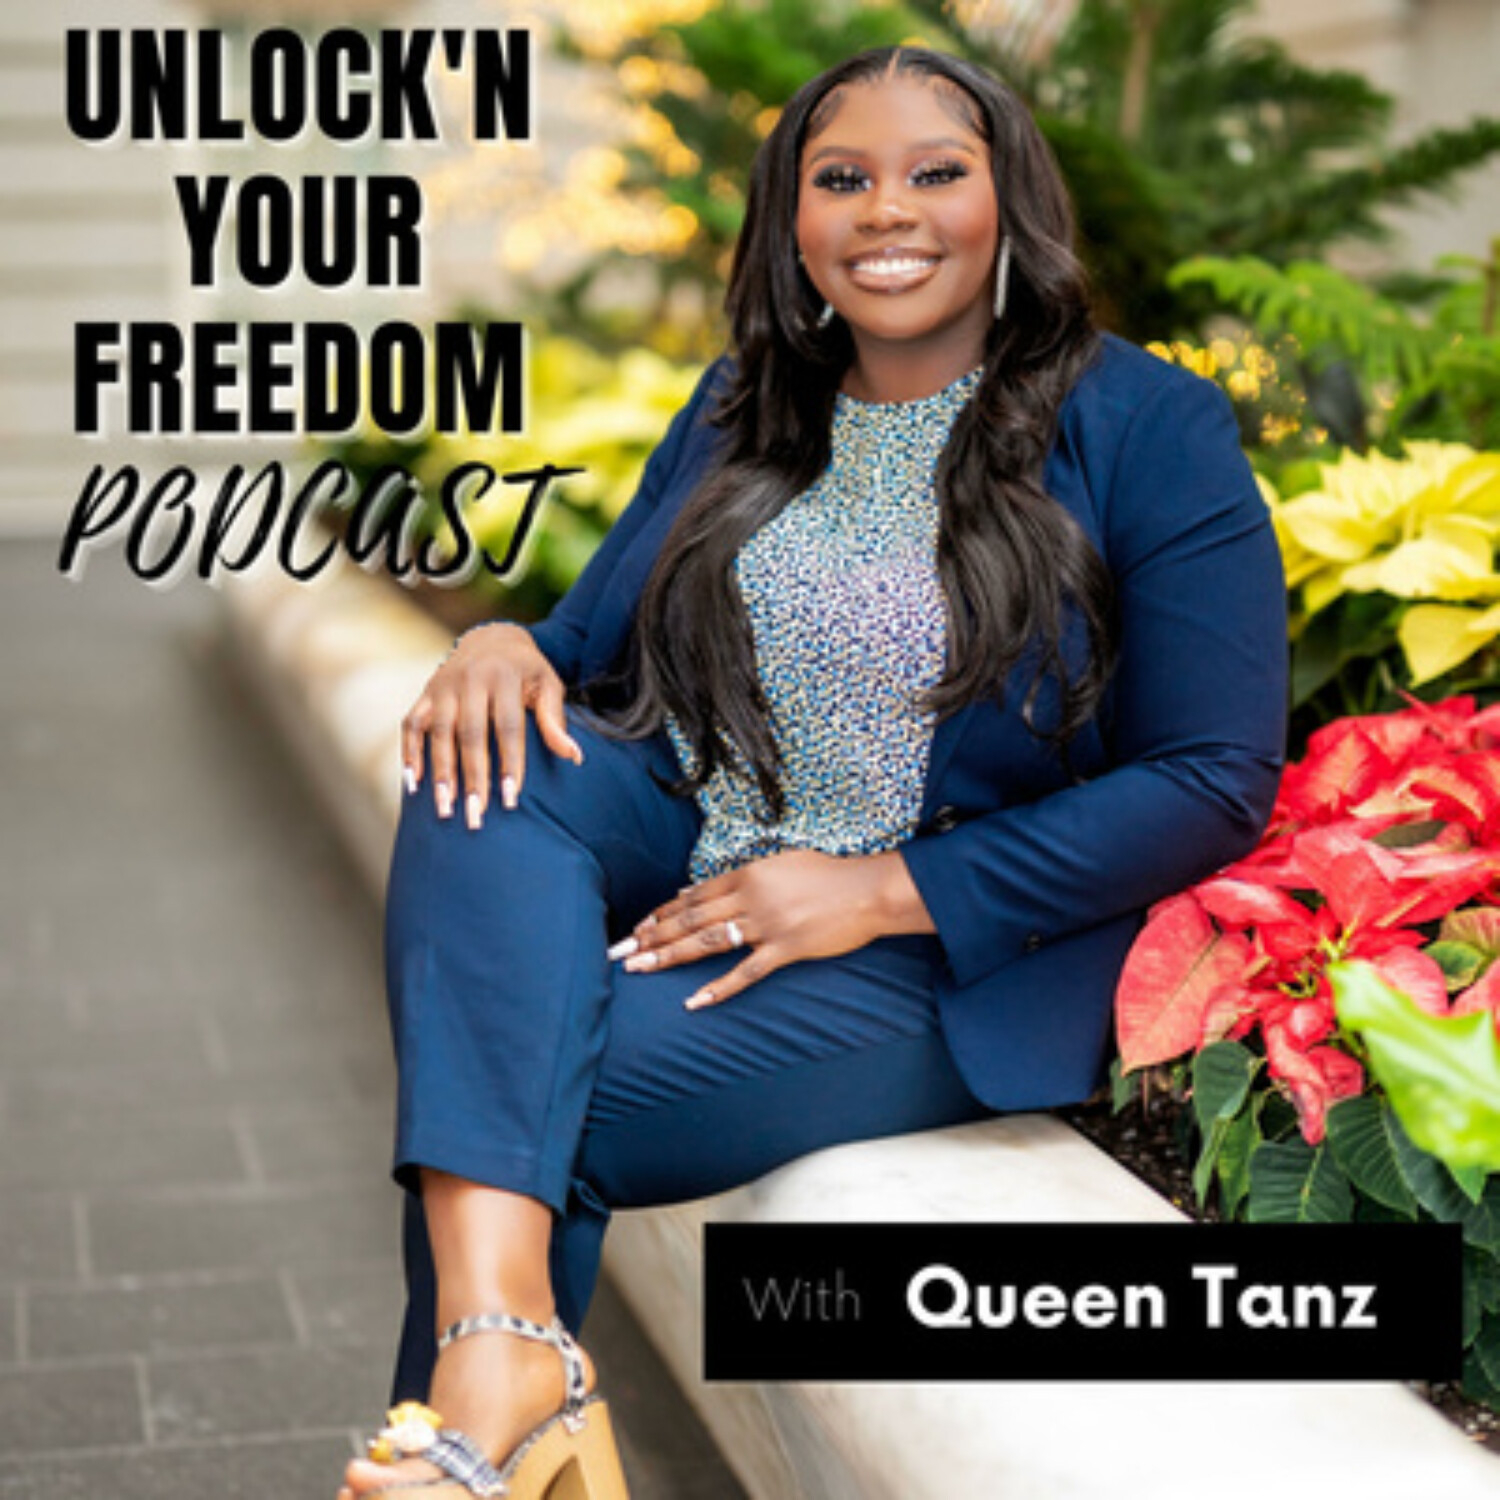 Chatters That Matter Presents: Unlock’N Your Freedom with Queen Tanz